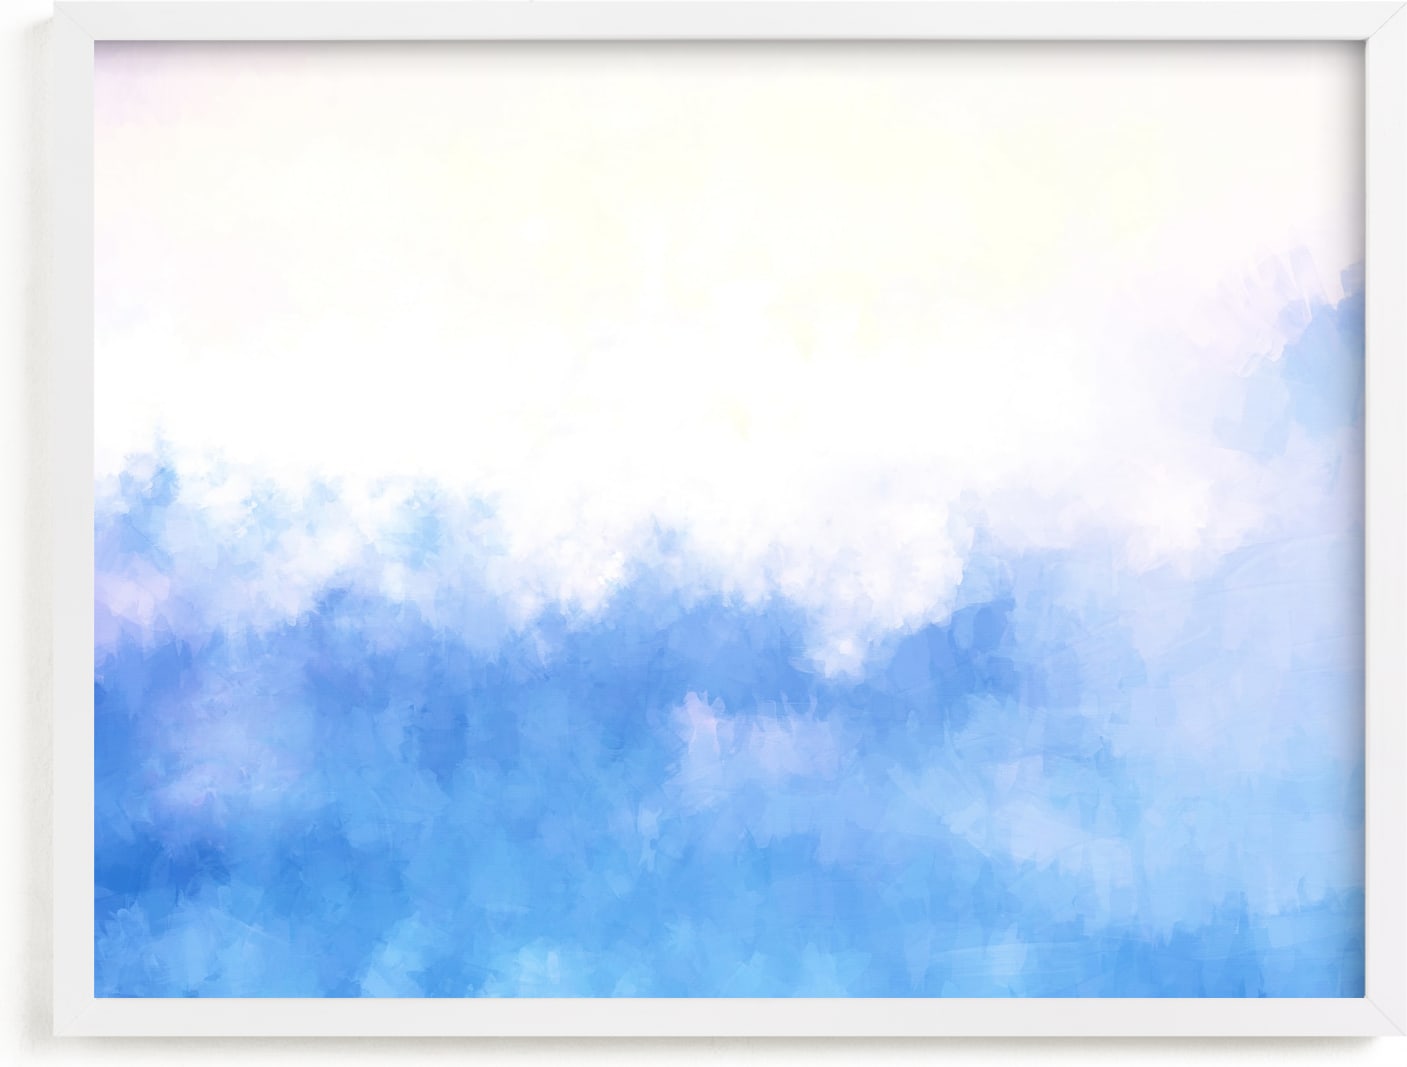 This is a blue nursery wall art by Rebecca Rueth called Periwinkle Dream.